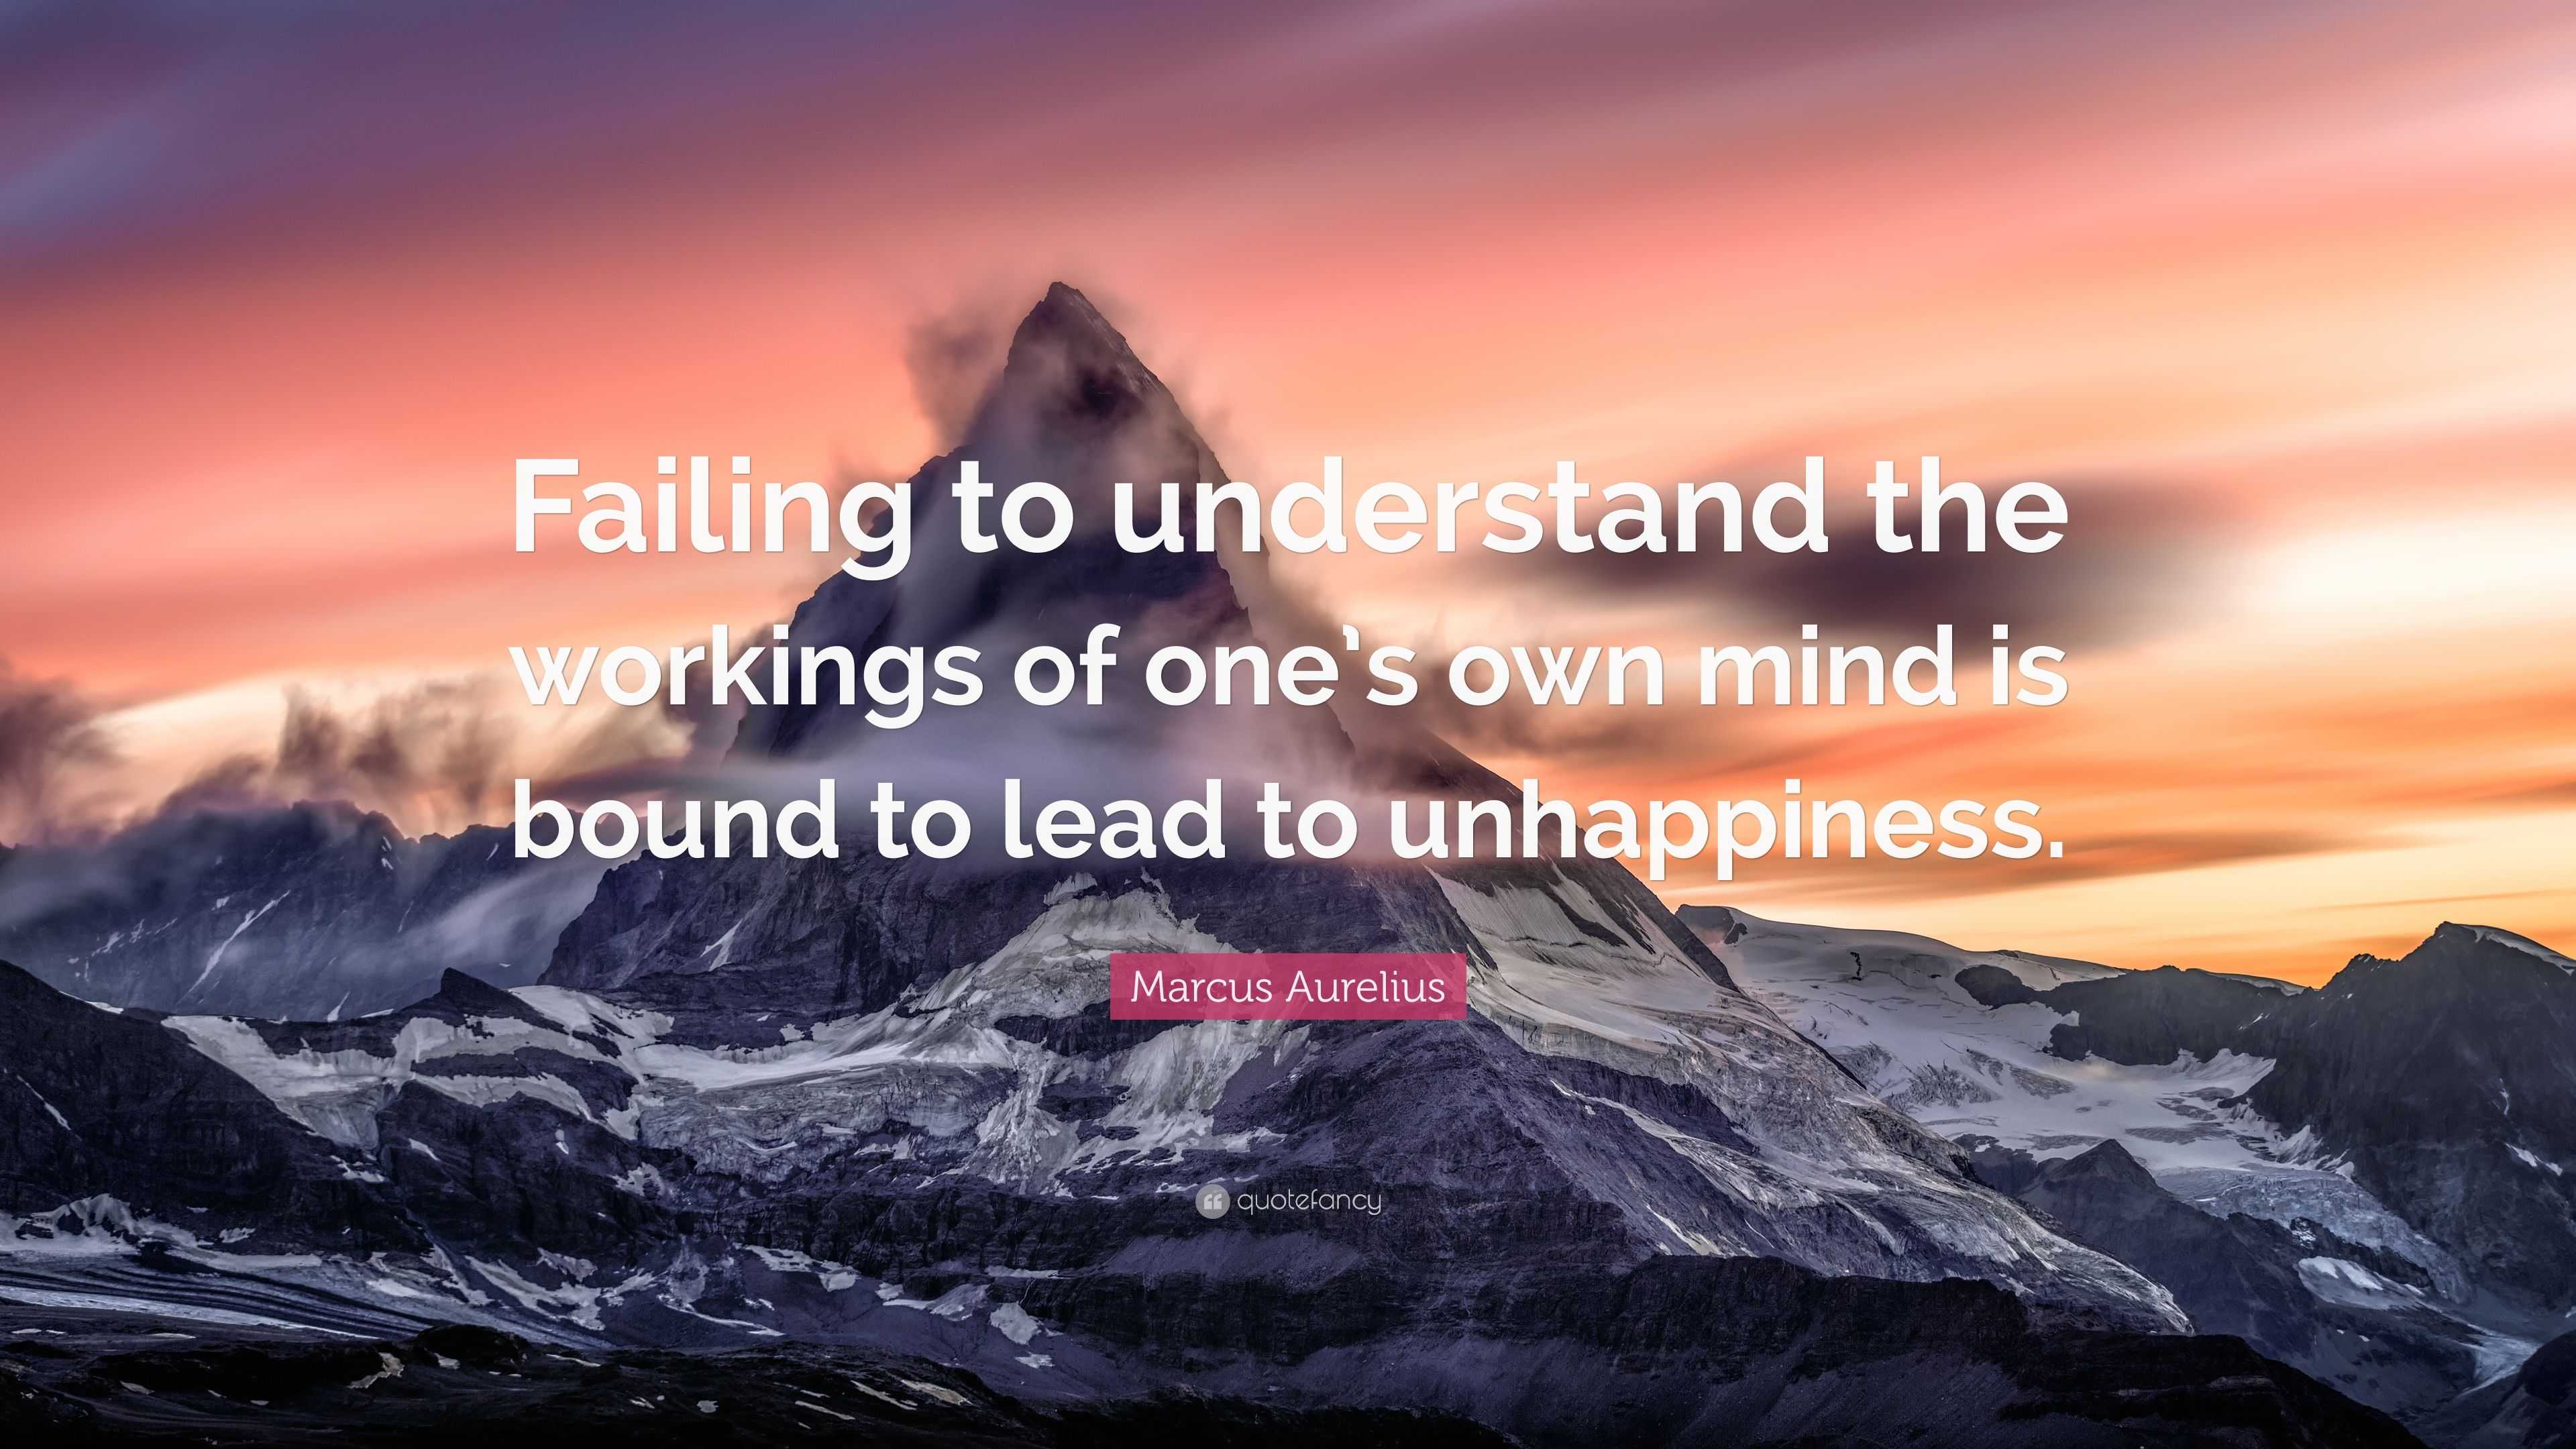 why mind wandering lead to unhappiness